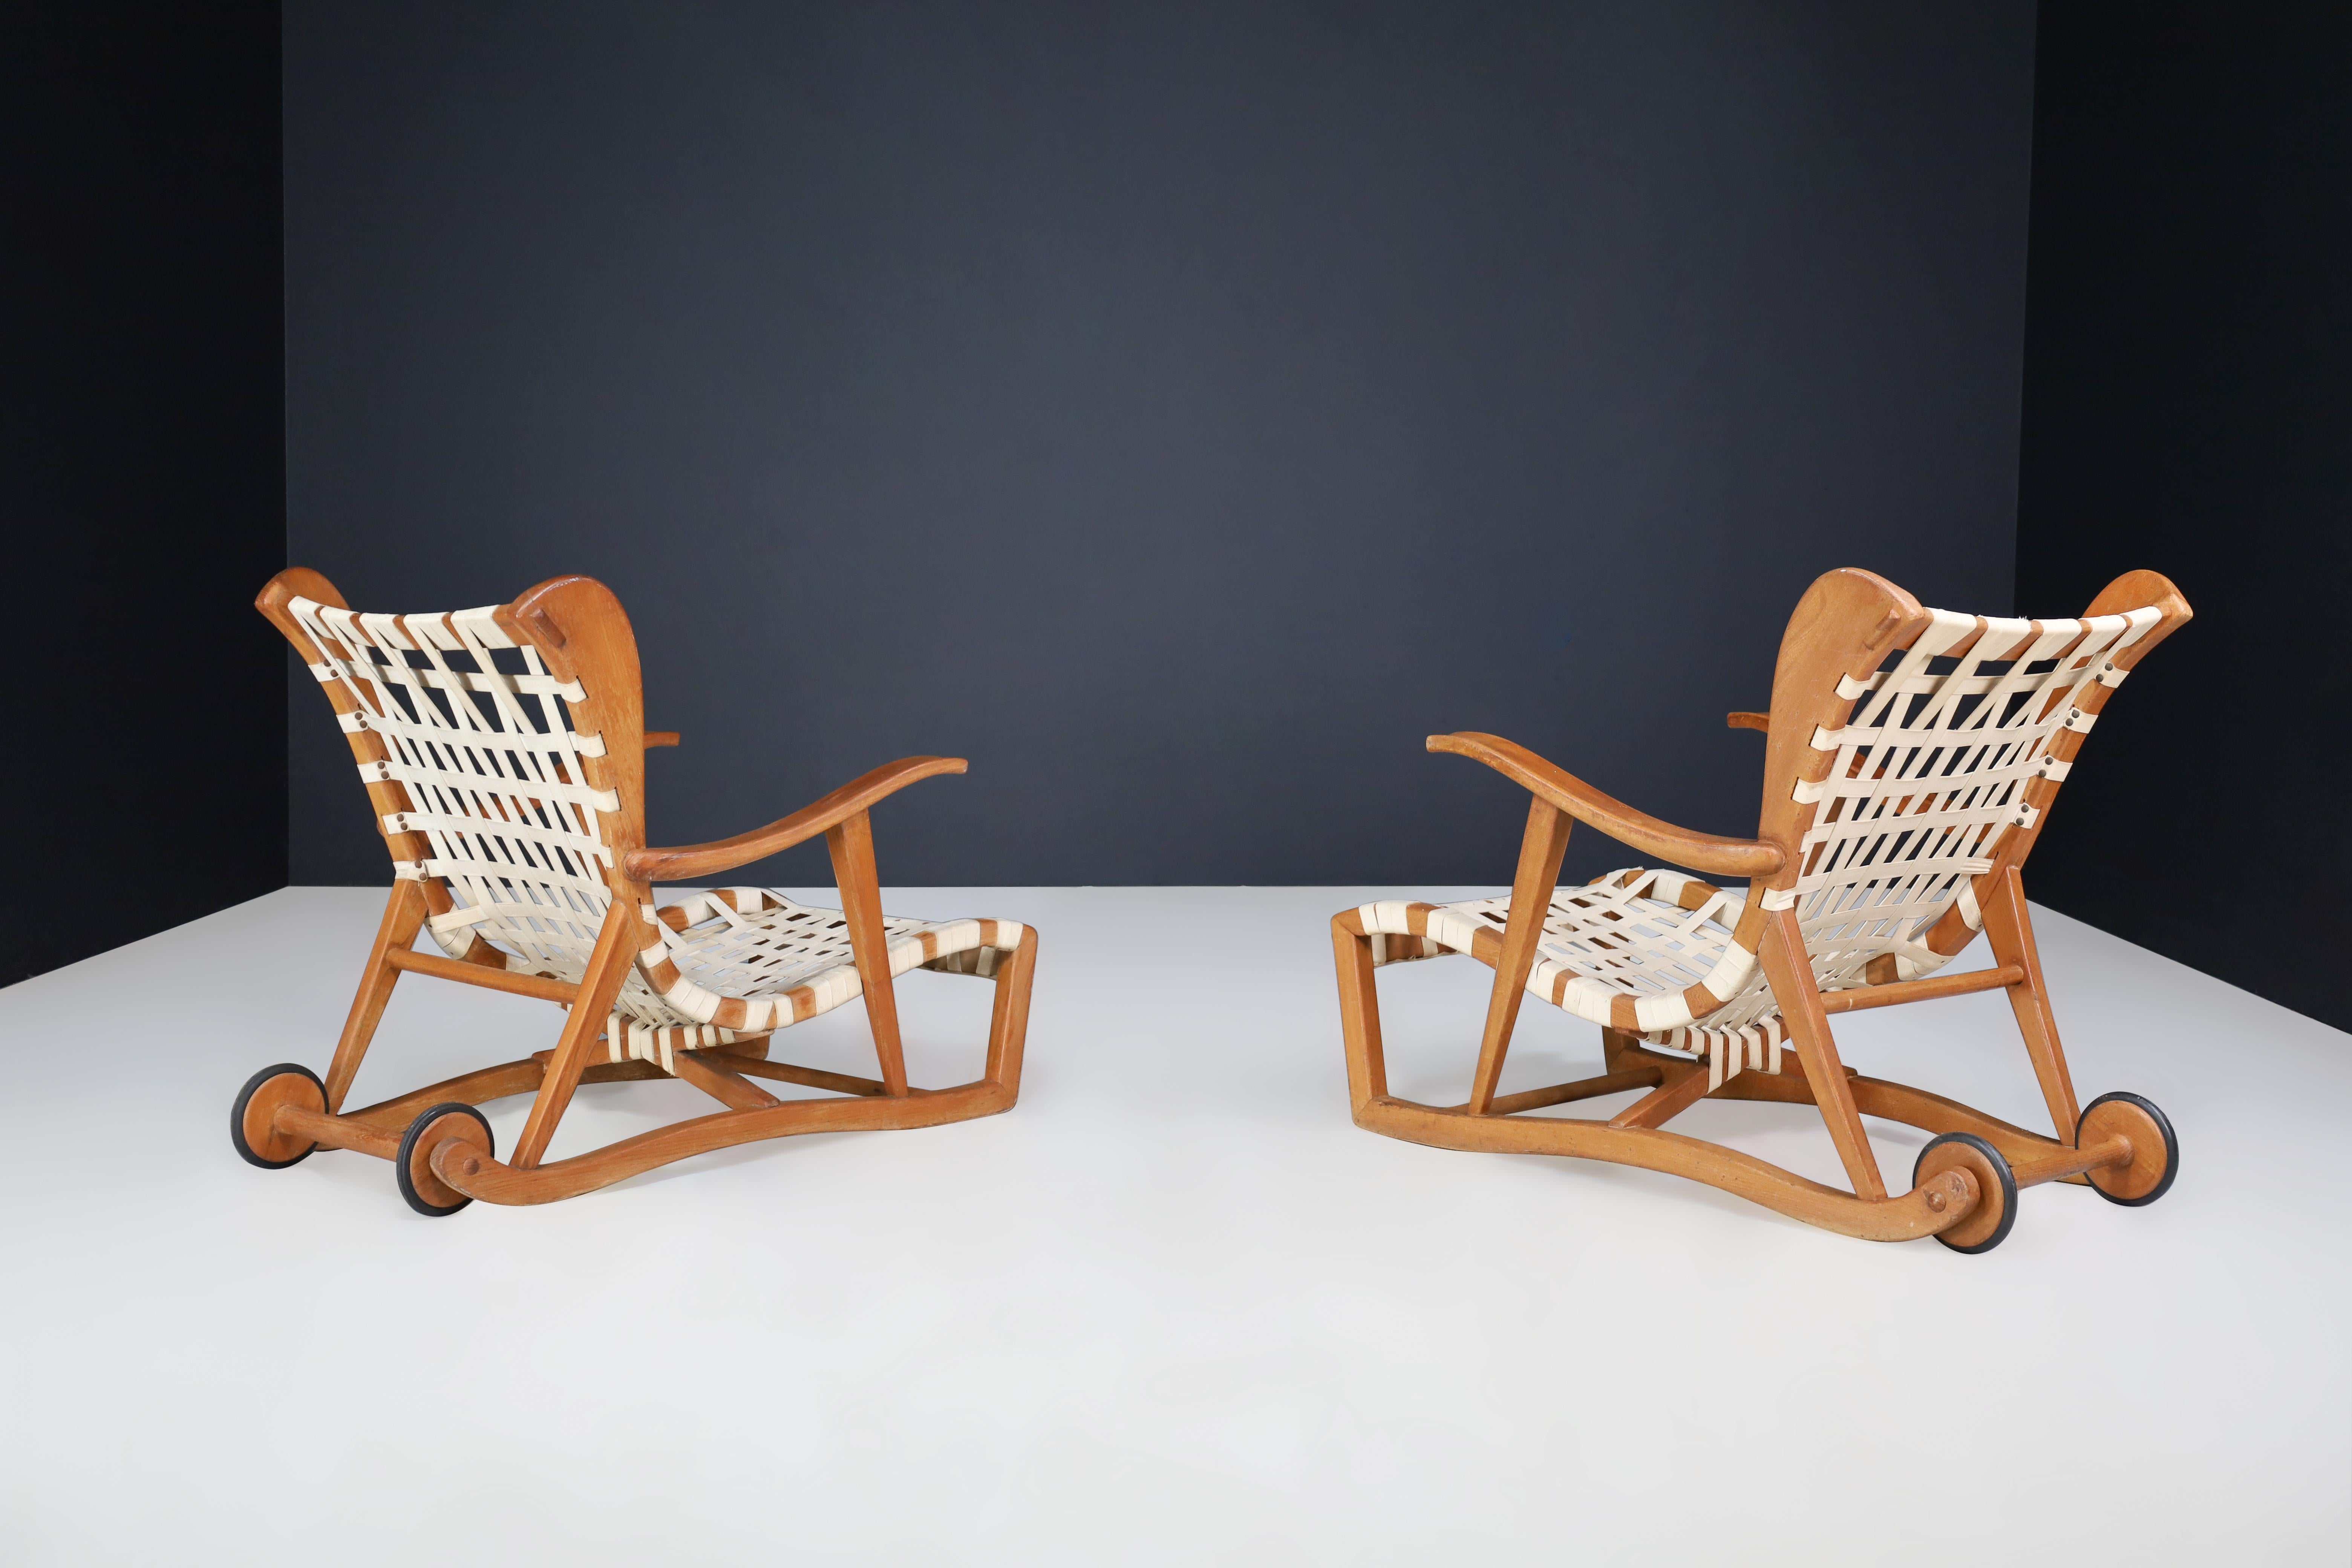 Sculptural Oak Lounge Chair by Guglielmo Pecorini, Italy, the 1950s For Sale 10